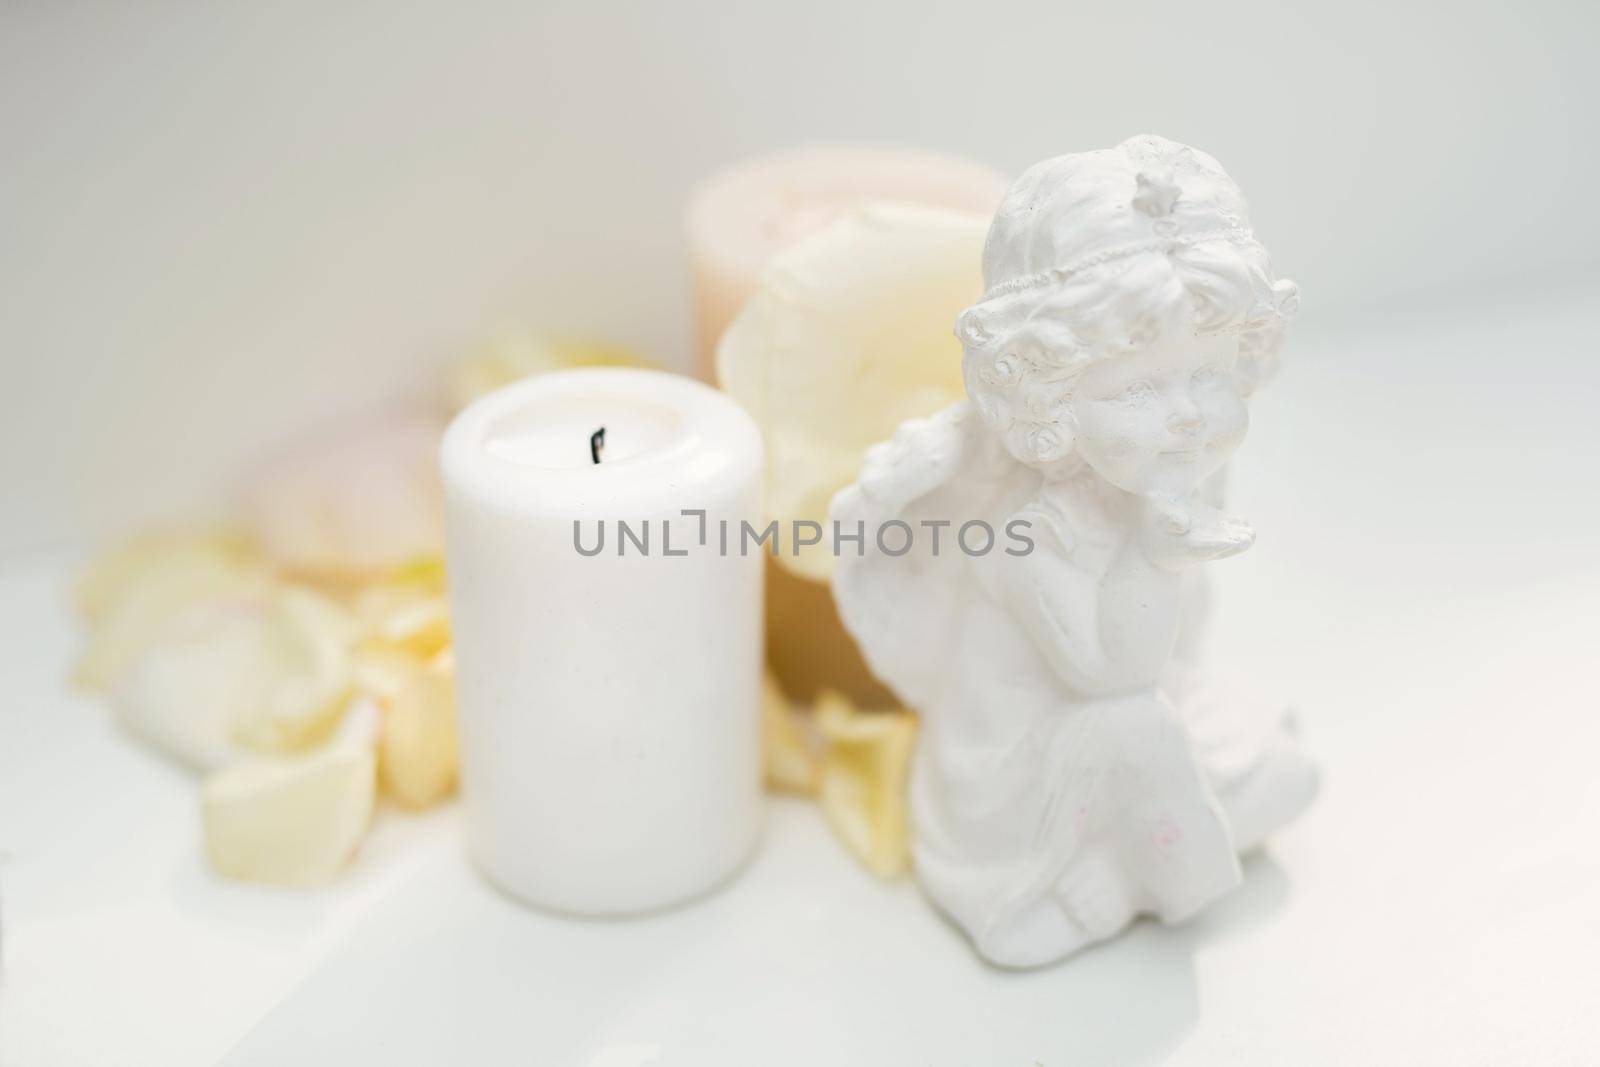 Statuette of an angel, a candle and rose petals on the table.